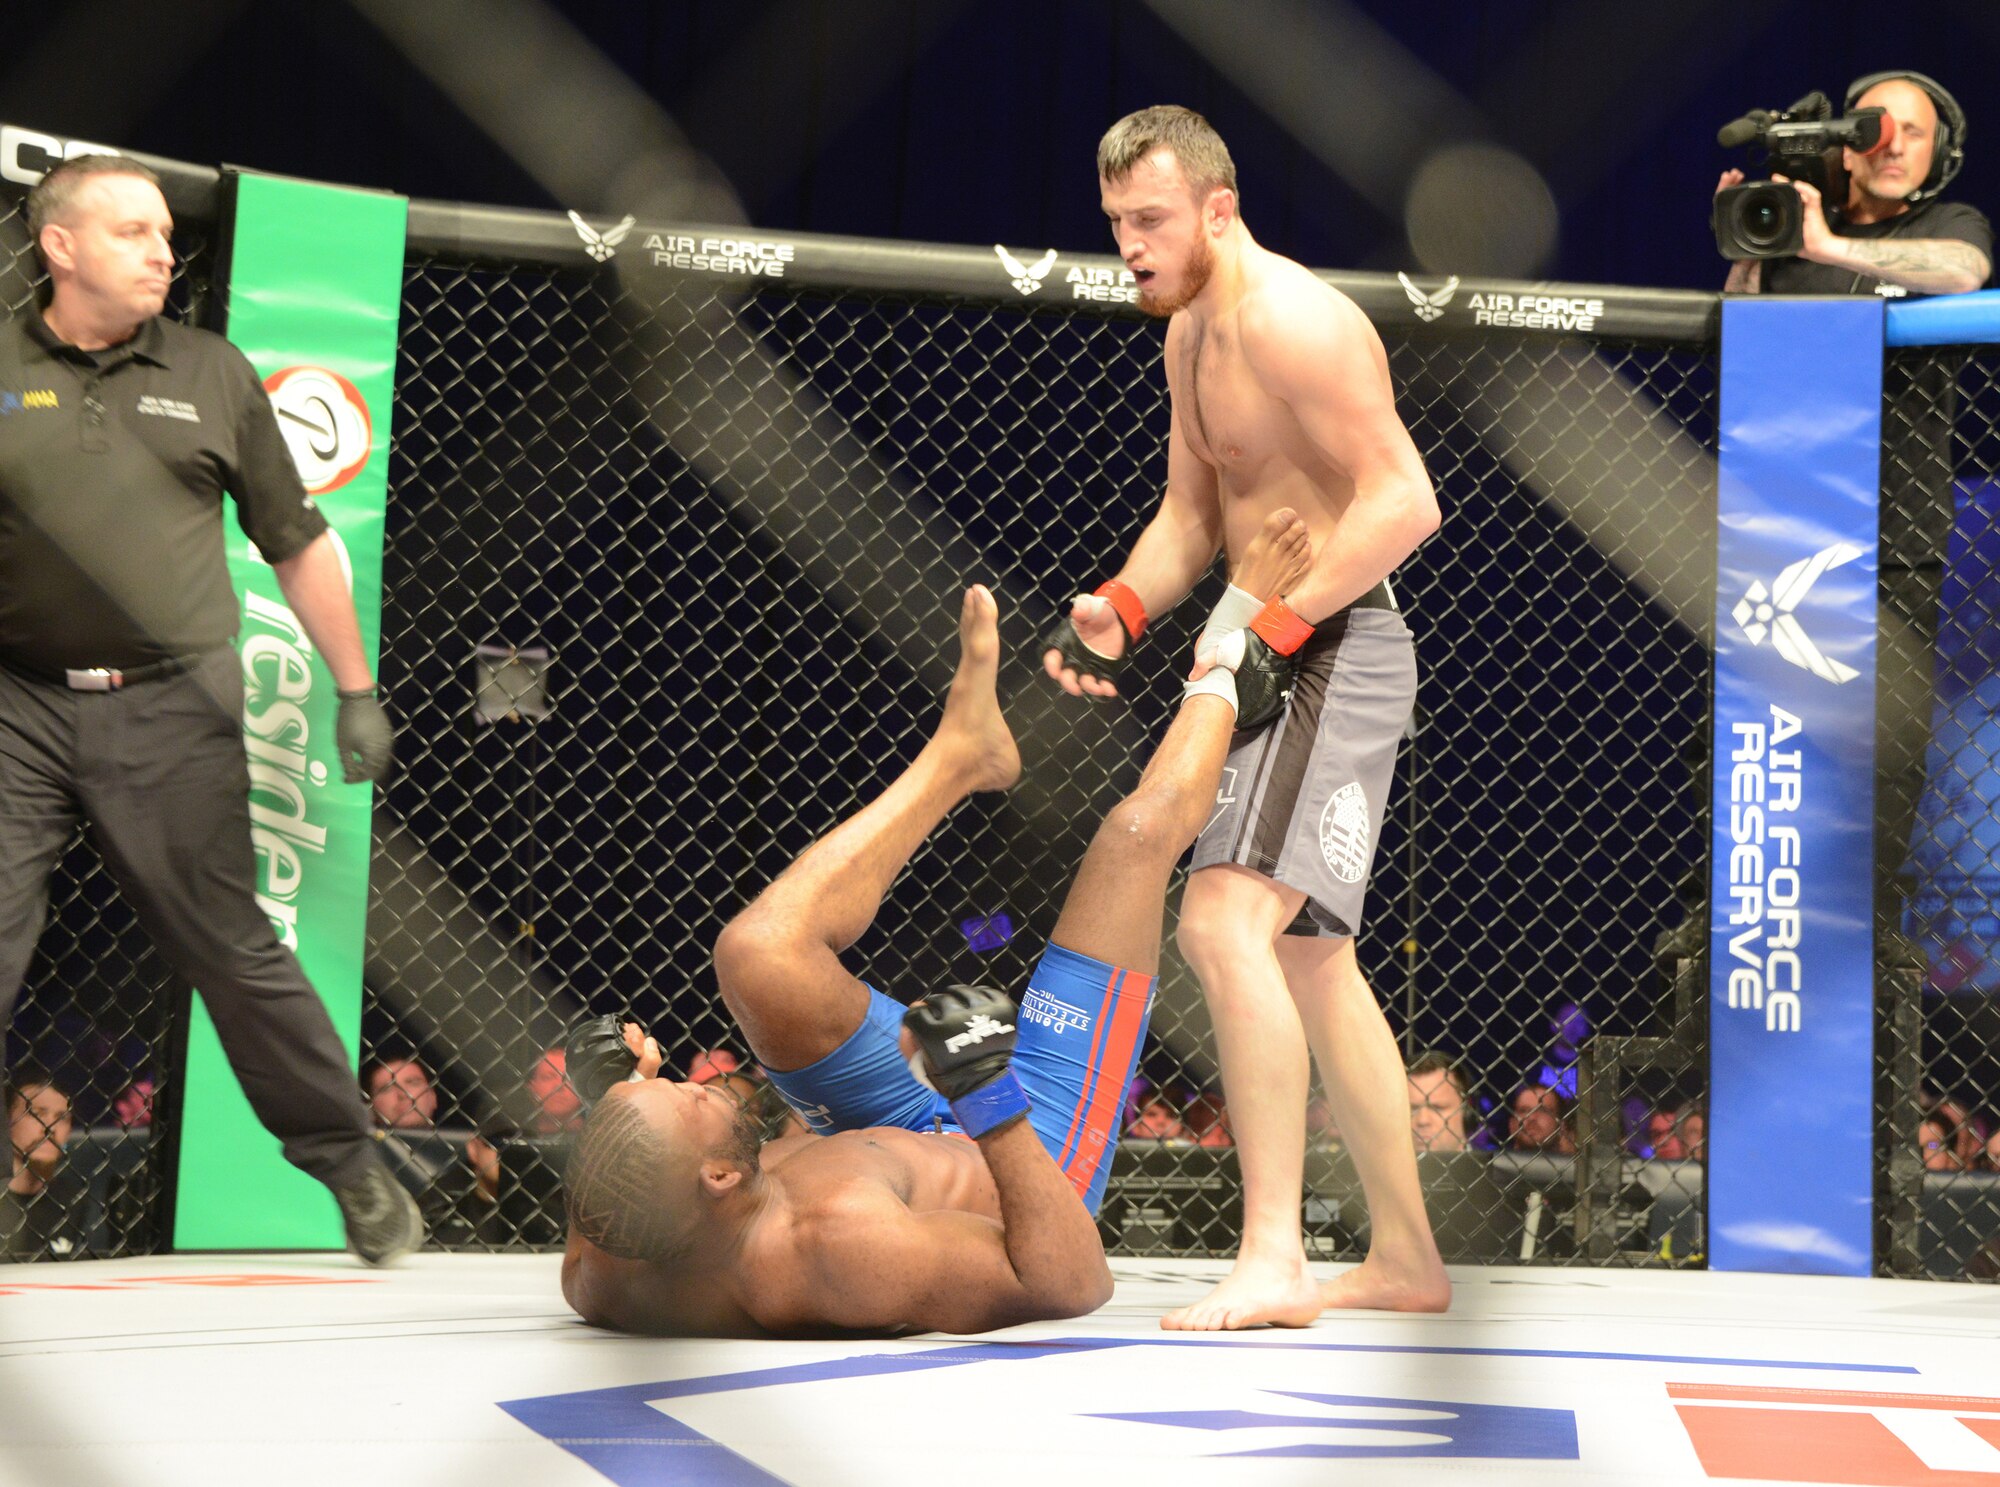 Air Force recruiting sponsorship with Professional Fighters League